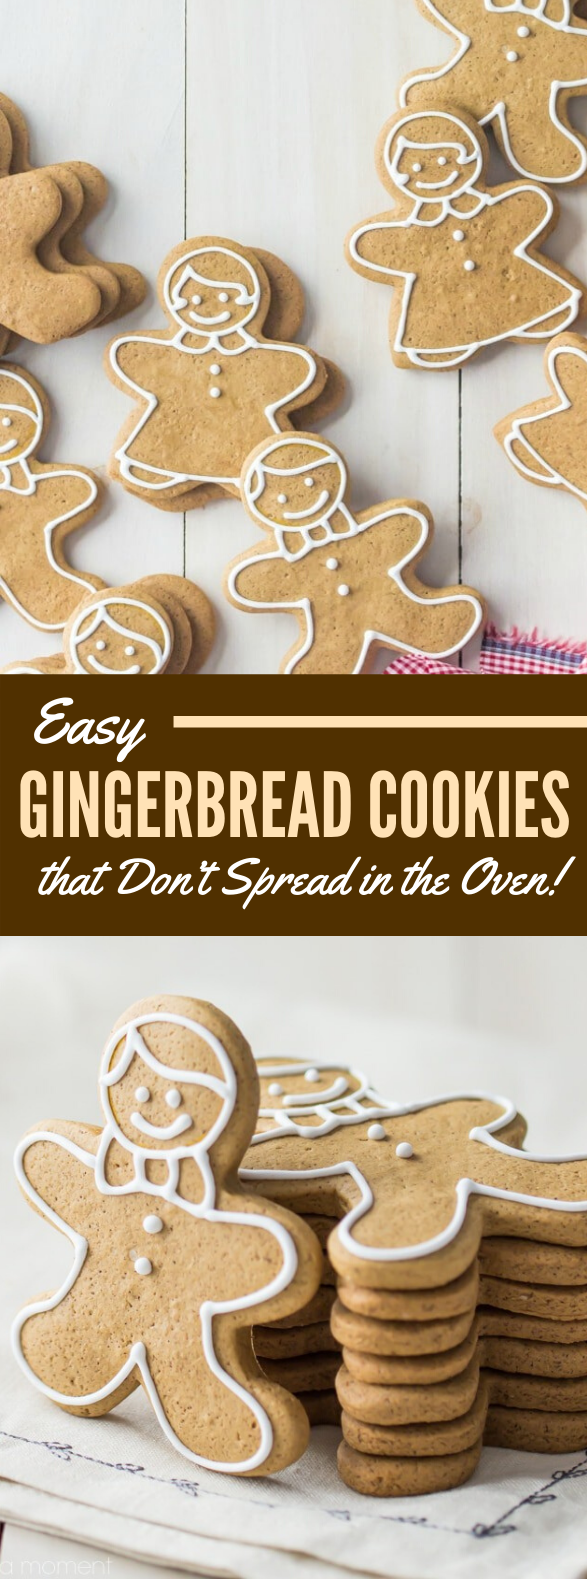 Gingerbread Cookies that Don’t Spread in the Oven #holidayrecipe #dessert